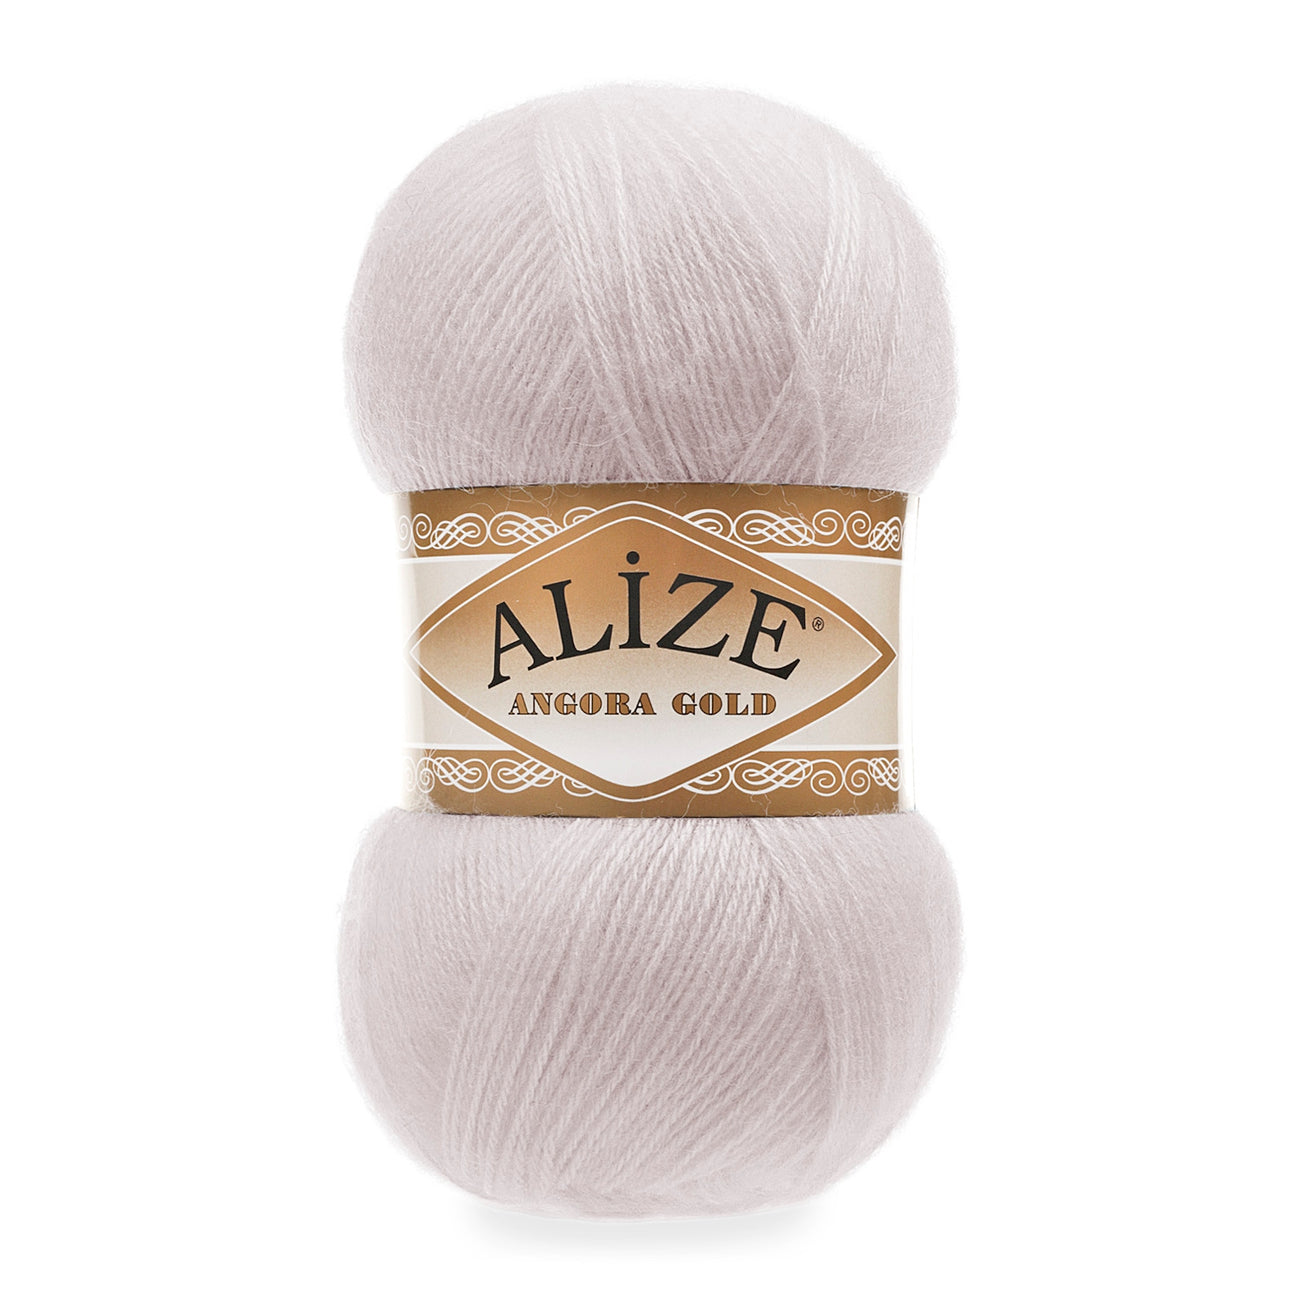 Alize 2023 The Most Trending Collections